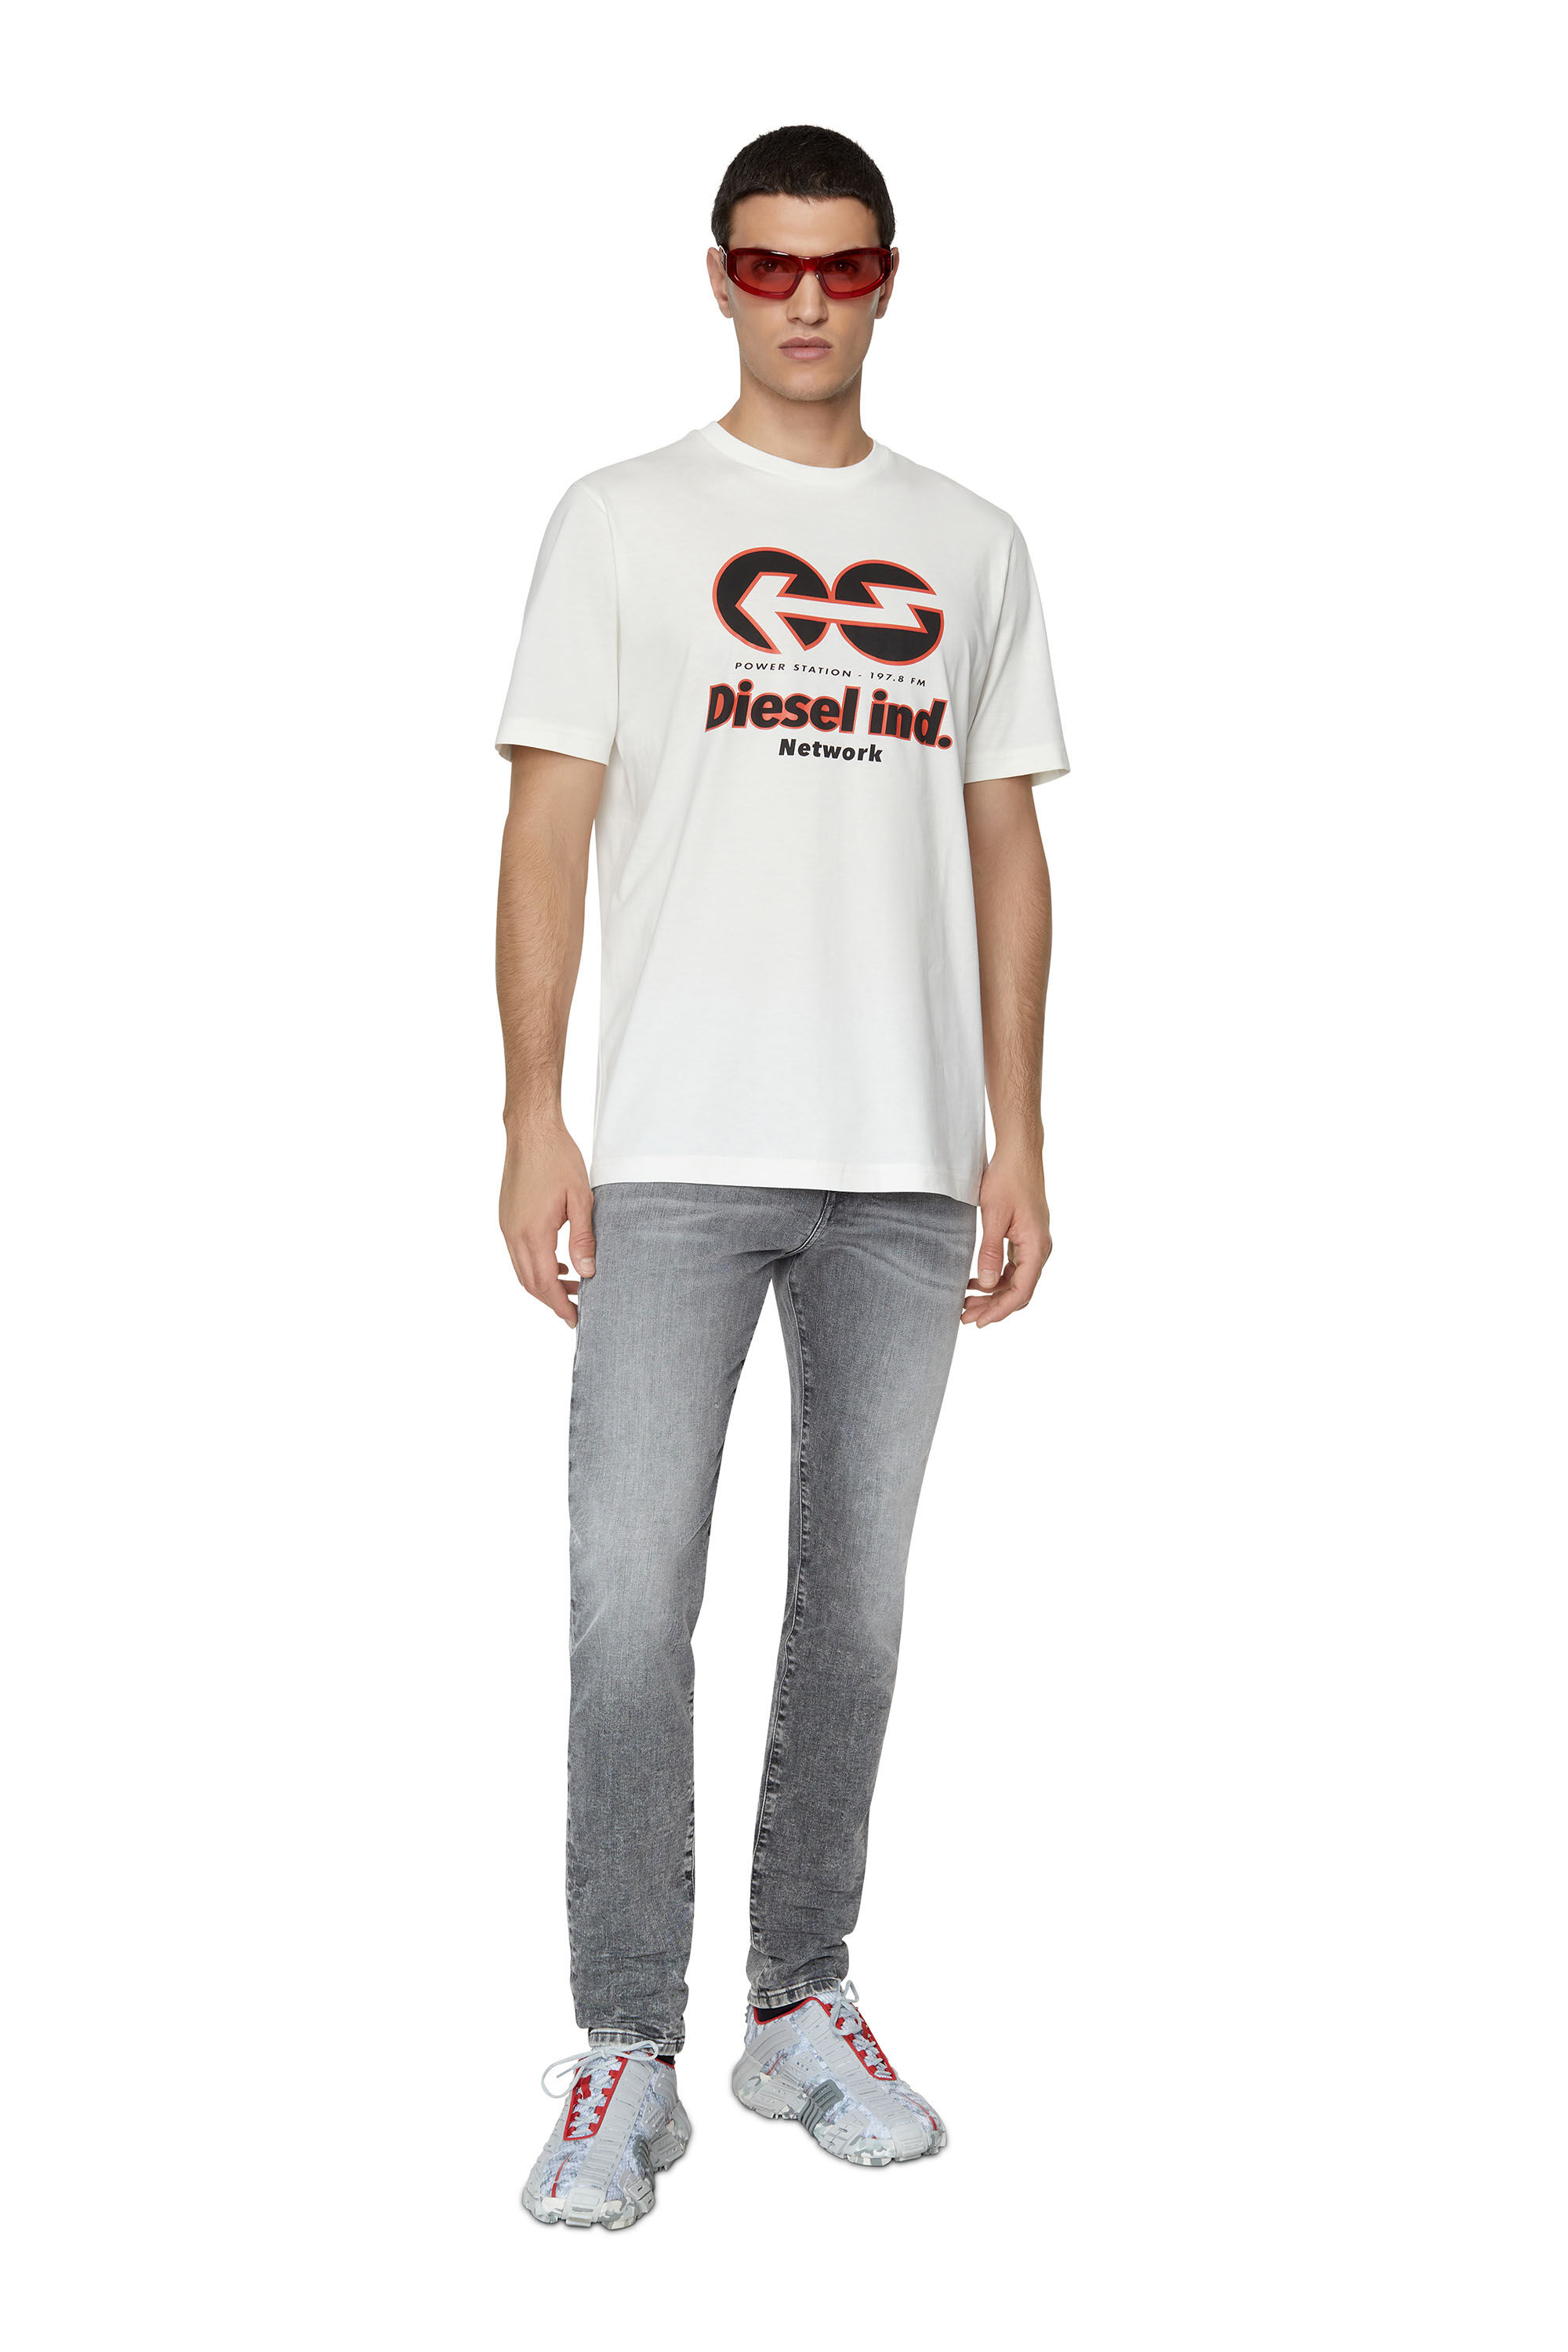 T-JUST-E18 Man: T-shirt with Diesel Network print | Diesel